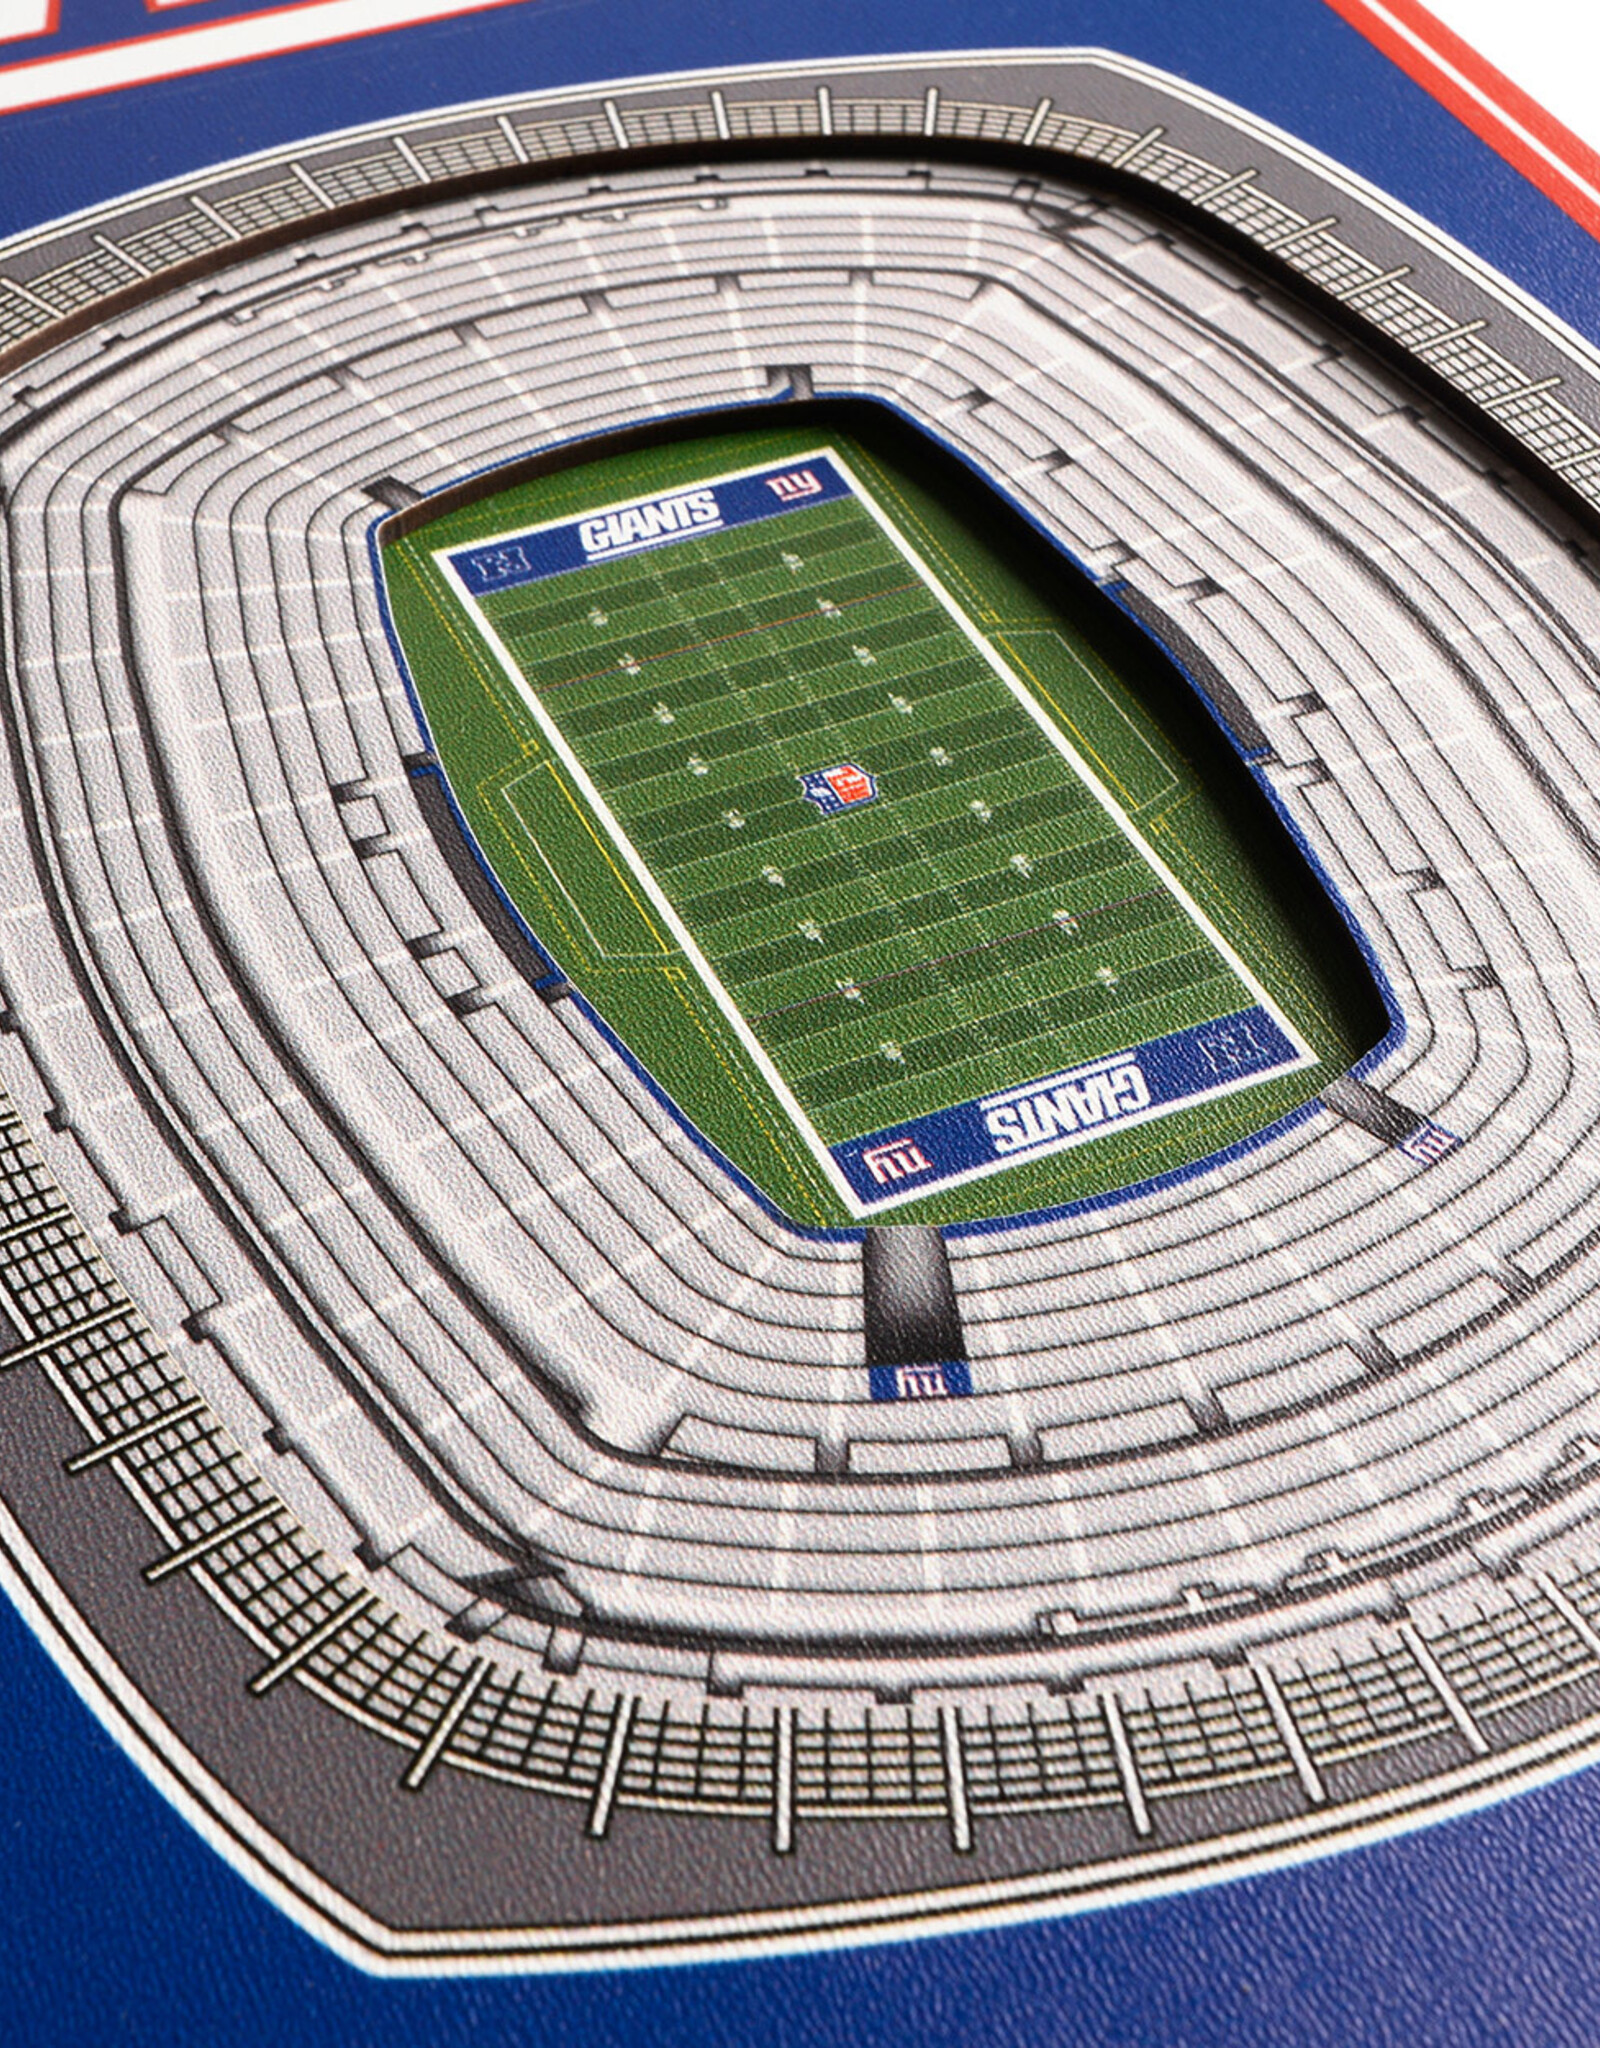 YOU THE FAN New York Giants 3D StadiumView 8x32 Banner